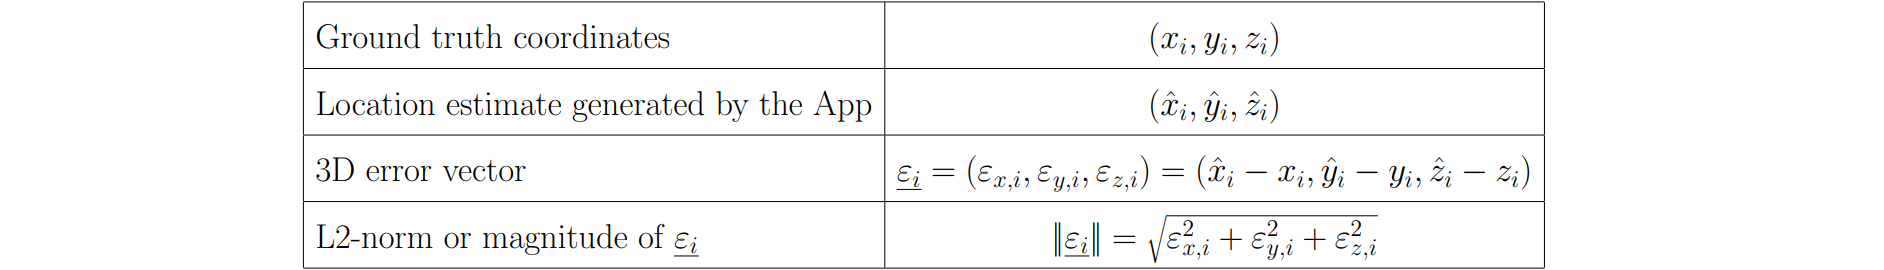 Equations related to PerfLoc competition